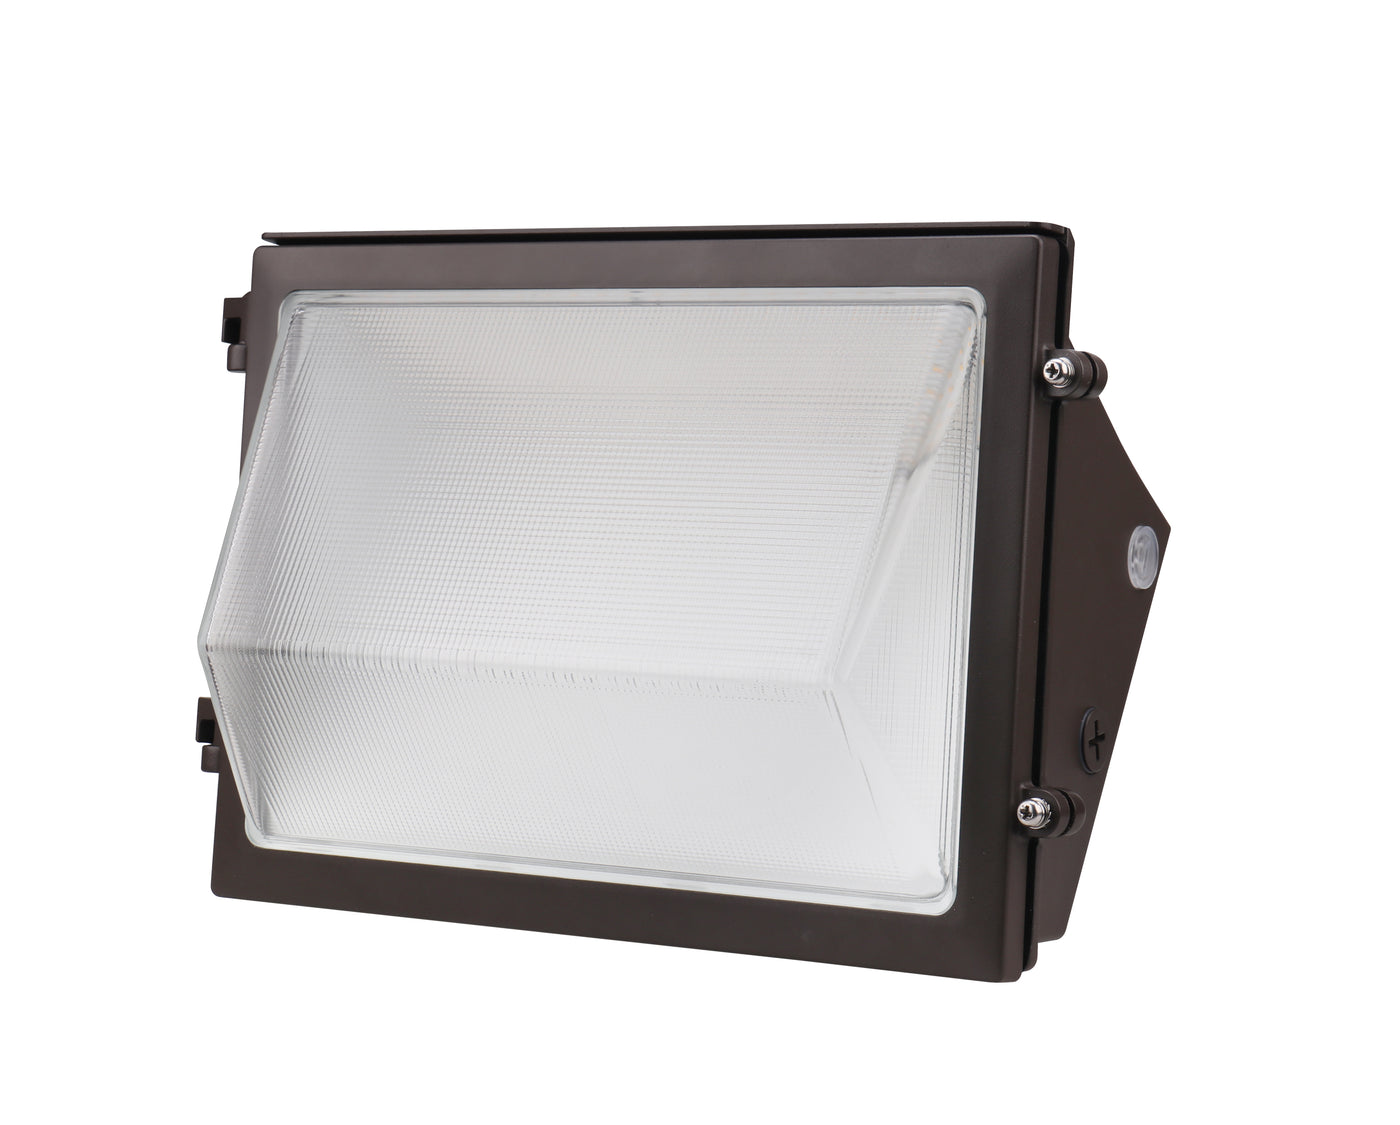 LED Traditional Wall Pack, 6075 Lumen Max, Wattage and CCT Selectable, 0-10V Dimming, Photocell, 120-277V or 277-480V